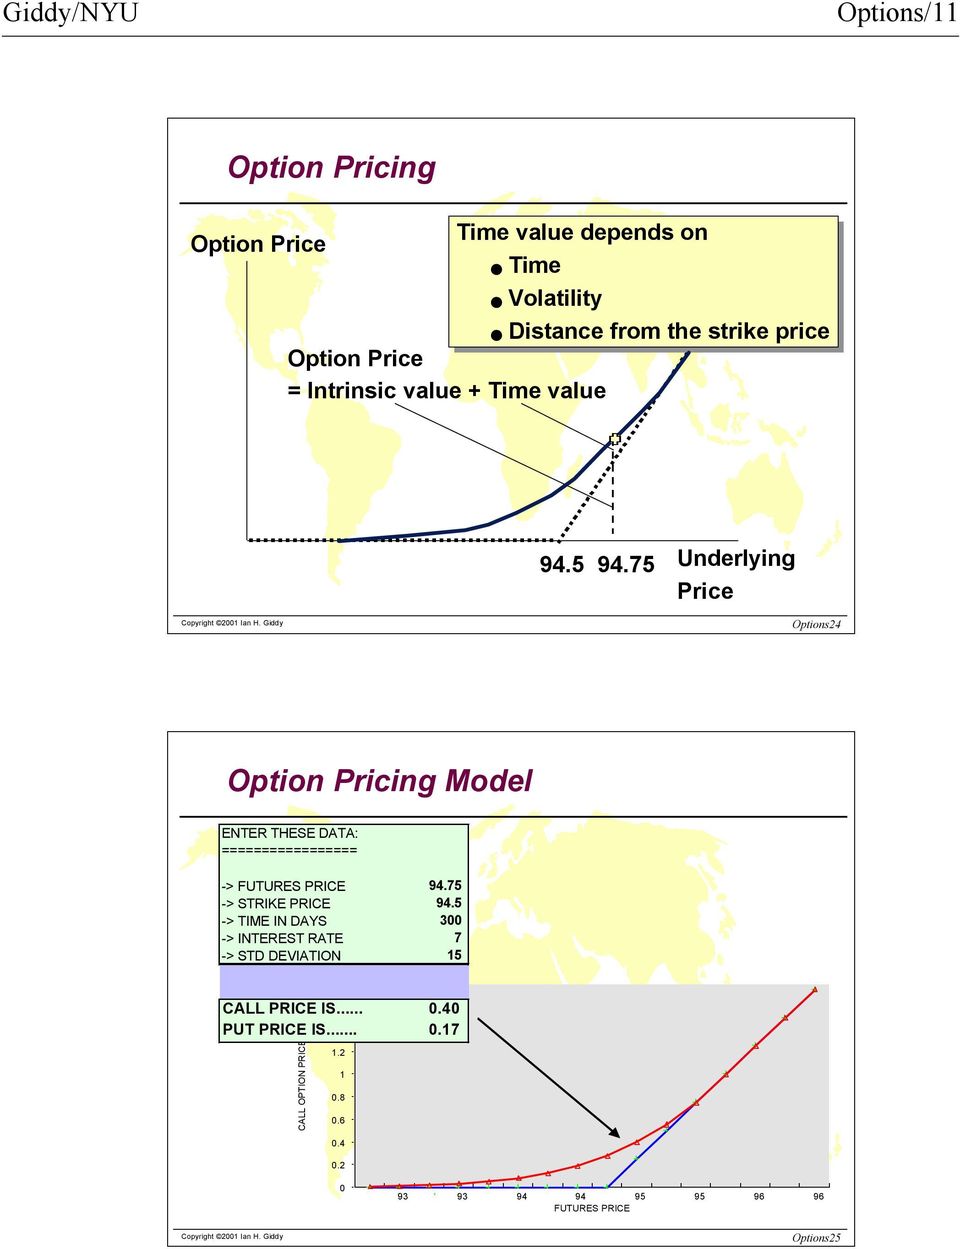 75 Underlying Price Options24 Option Pricing Model ENTER THESE DATA: ================= -> FUTURES PRICE 94.